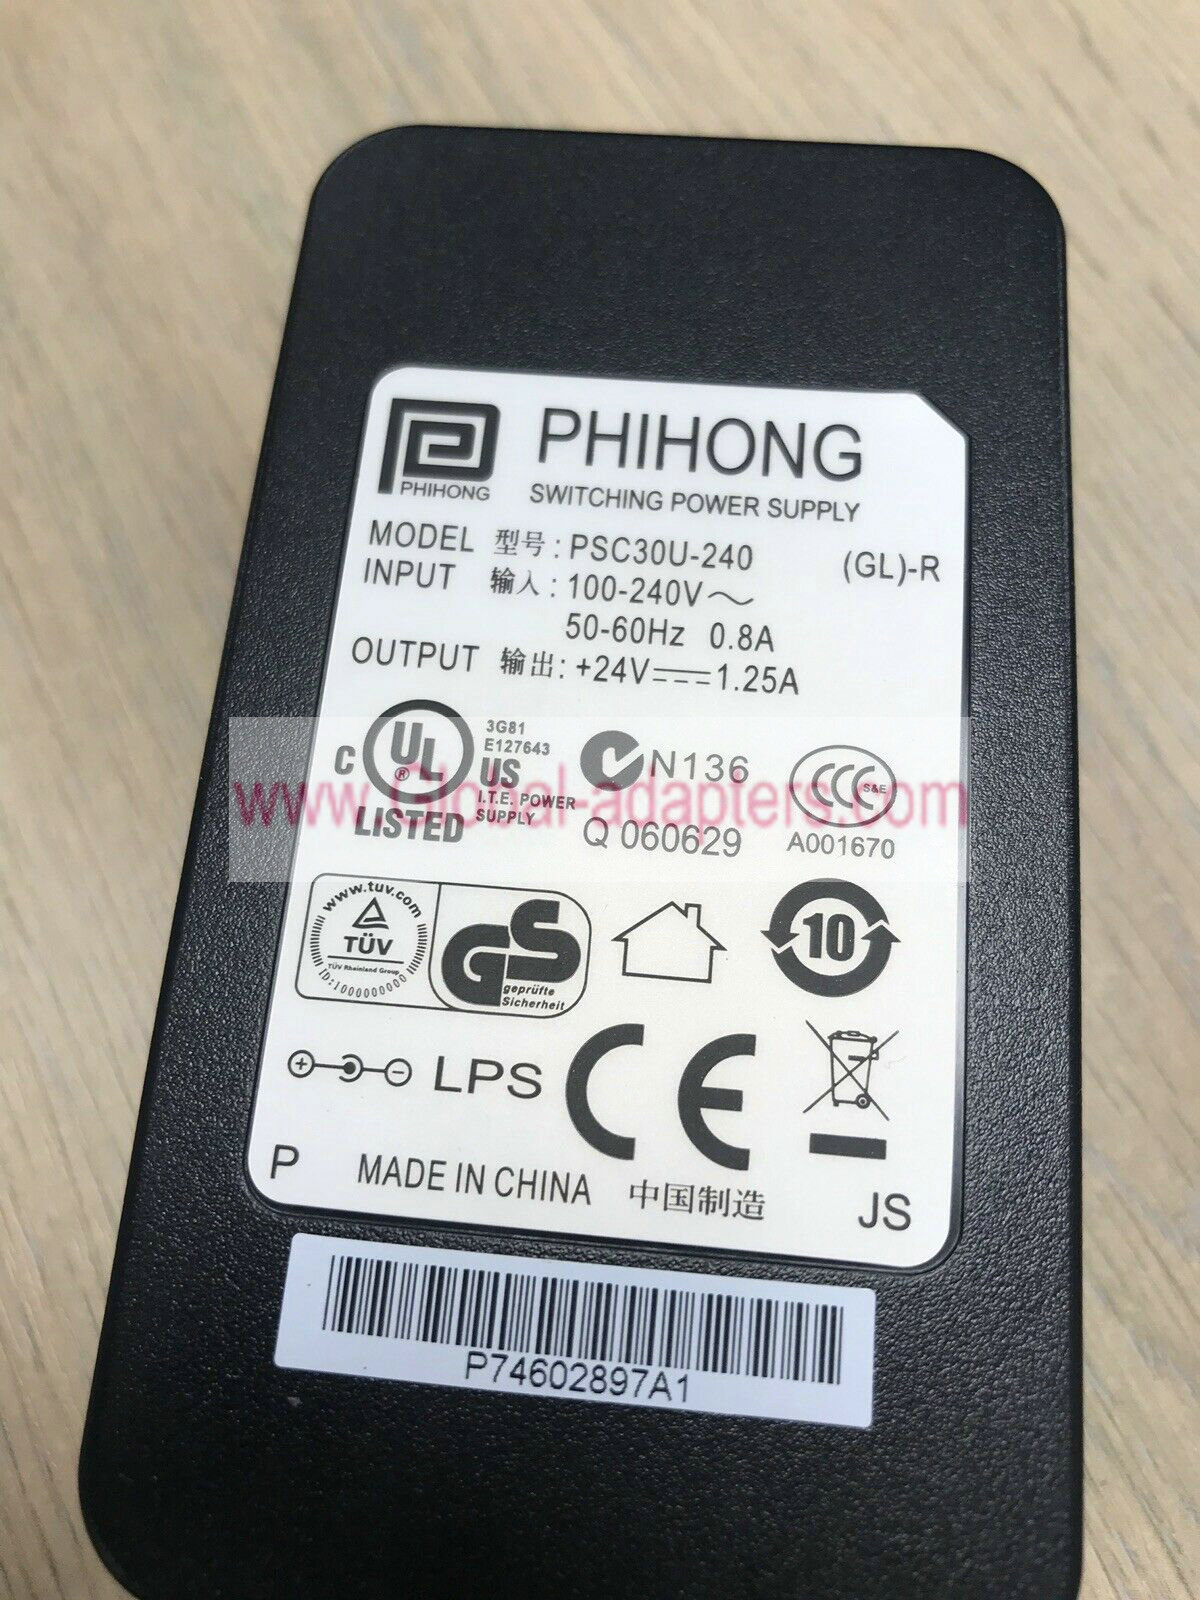 New PHIHONG 24V 1.25A 30W PSC30U-240 AC/DC SWITCHING POWER SUPPLY